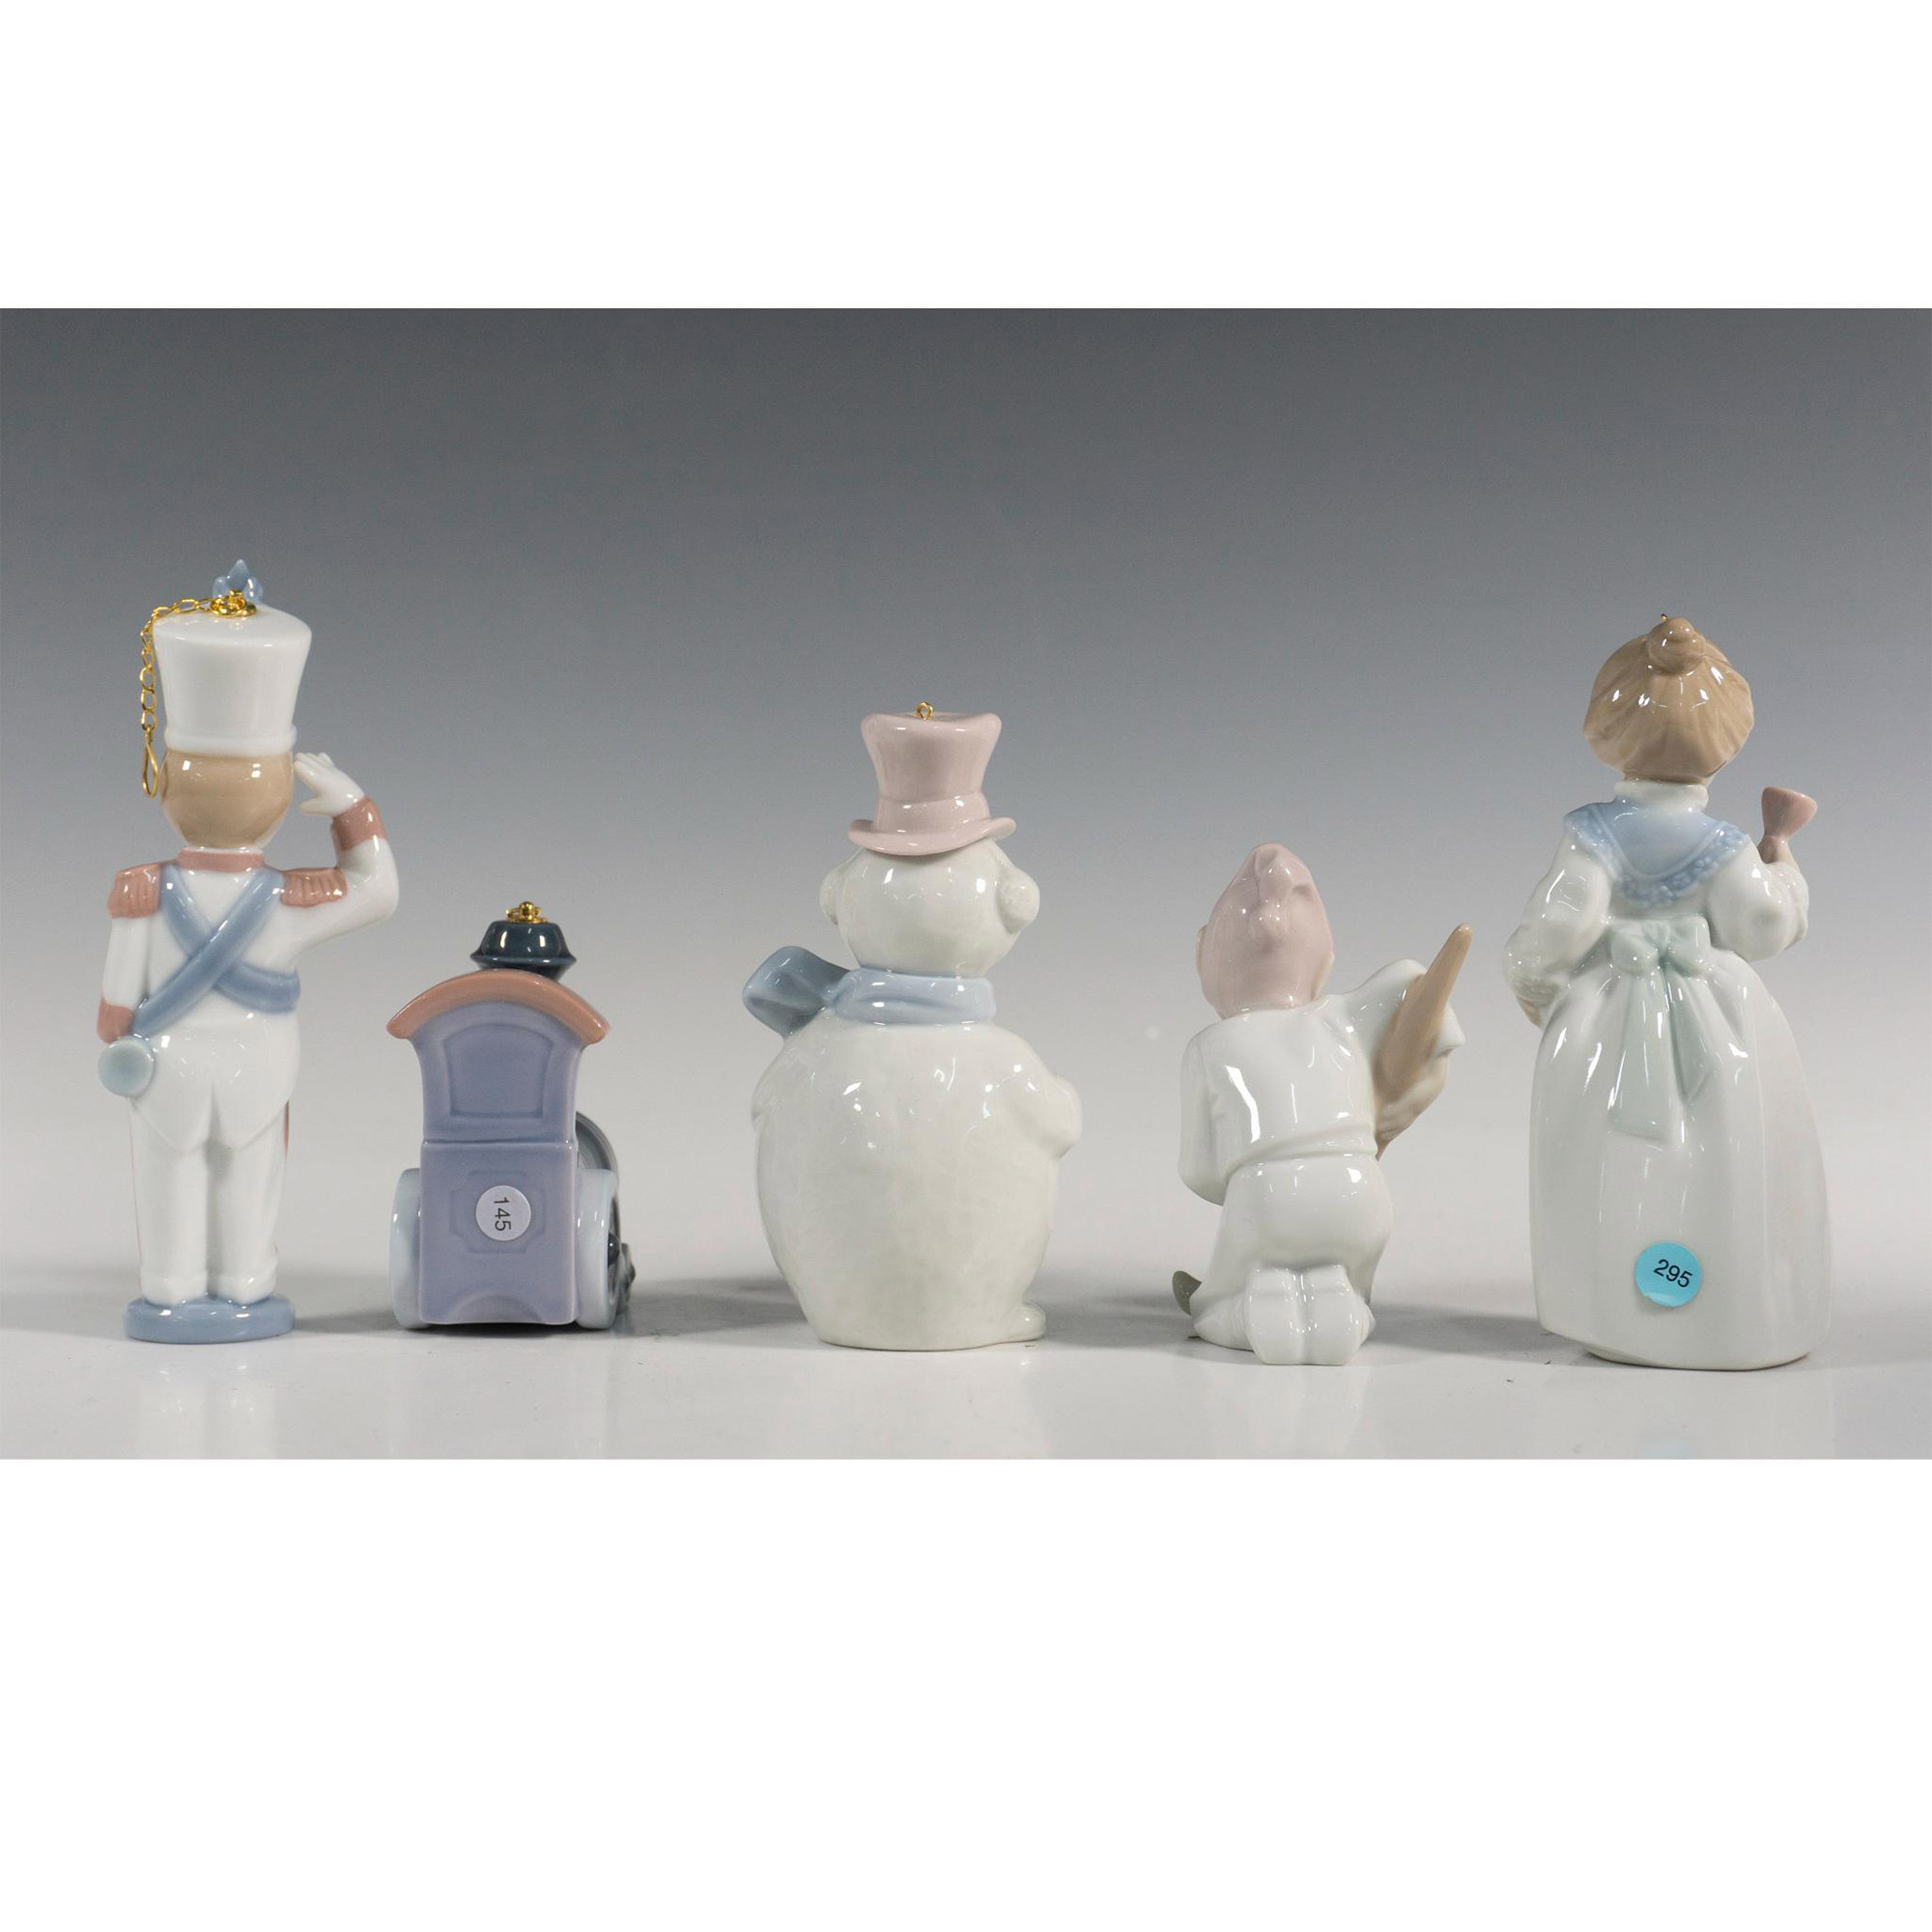 5pc Lladro Porcelain Figural Christmas Ornaments - Image 4 of 5